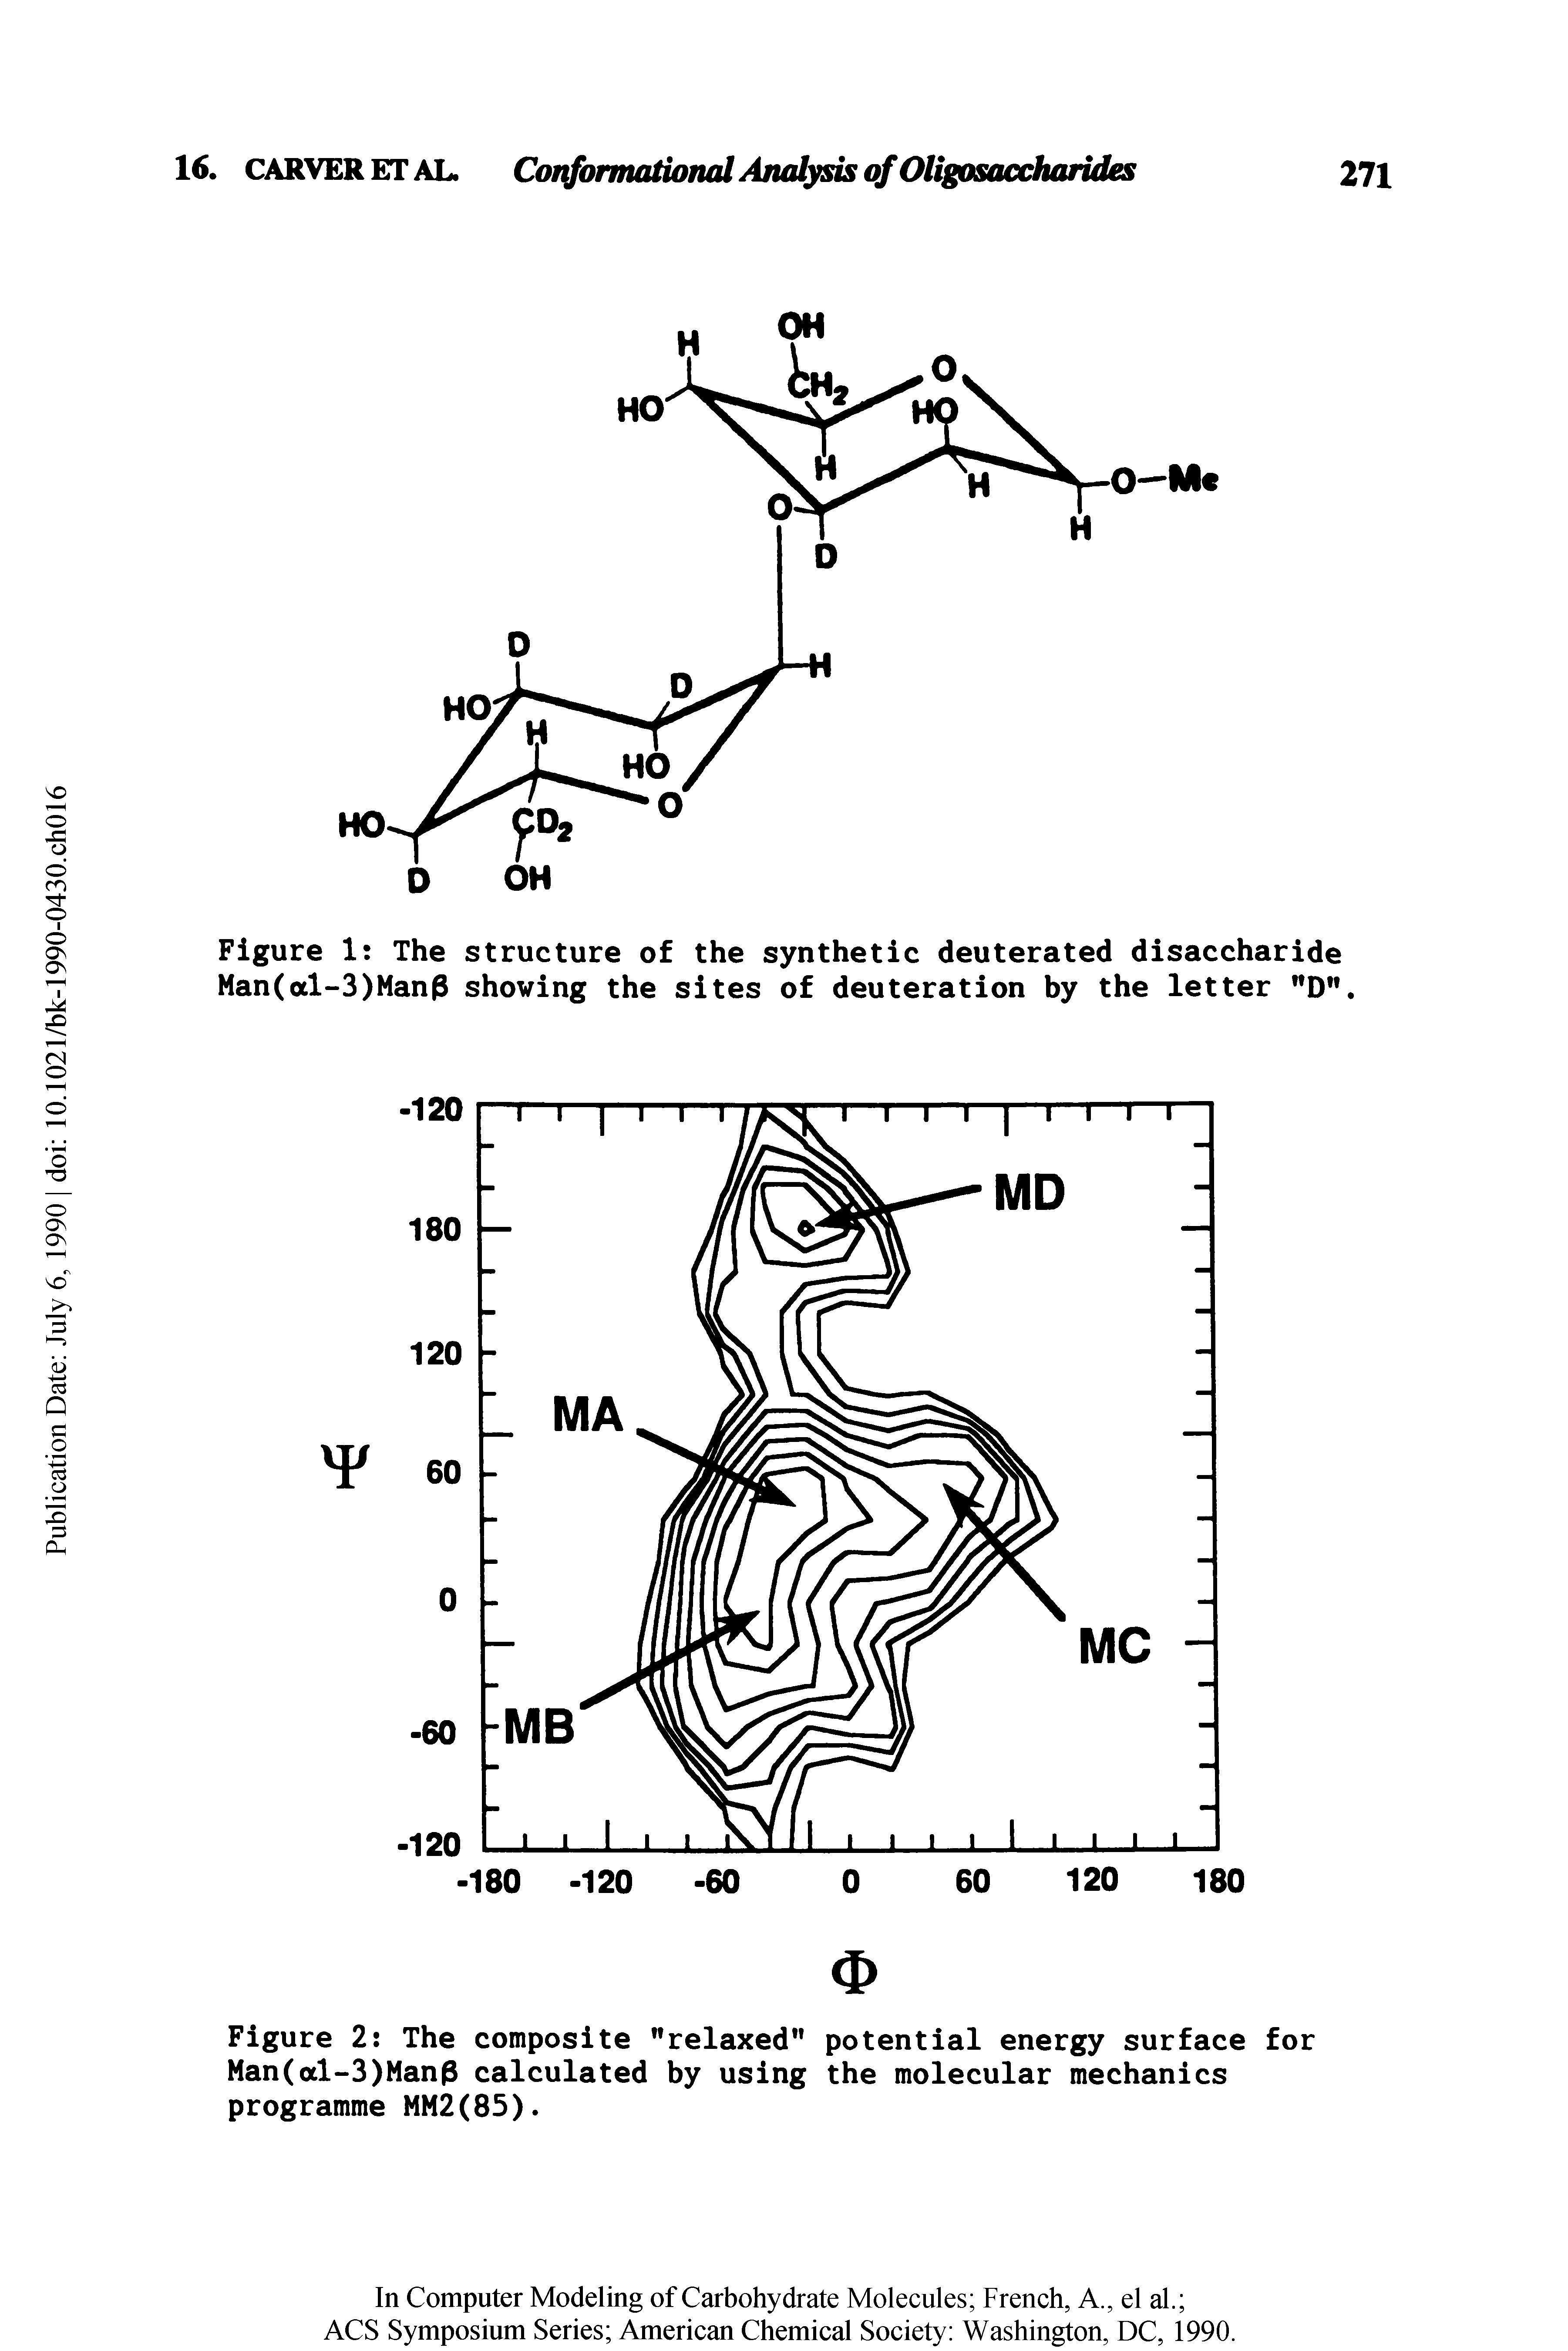 Figure 2 The composite "relaxed" potential energy surface for Man(al-3)Man3 calculated by using the molecular mechanics programme MM2(85).